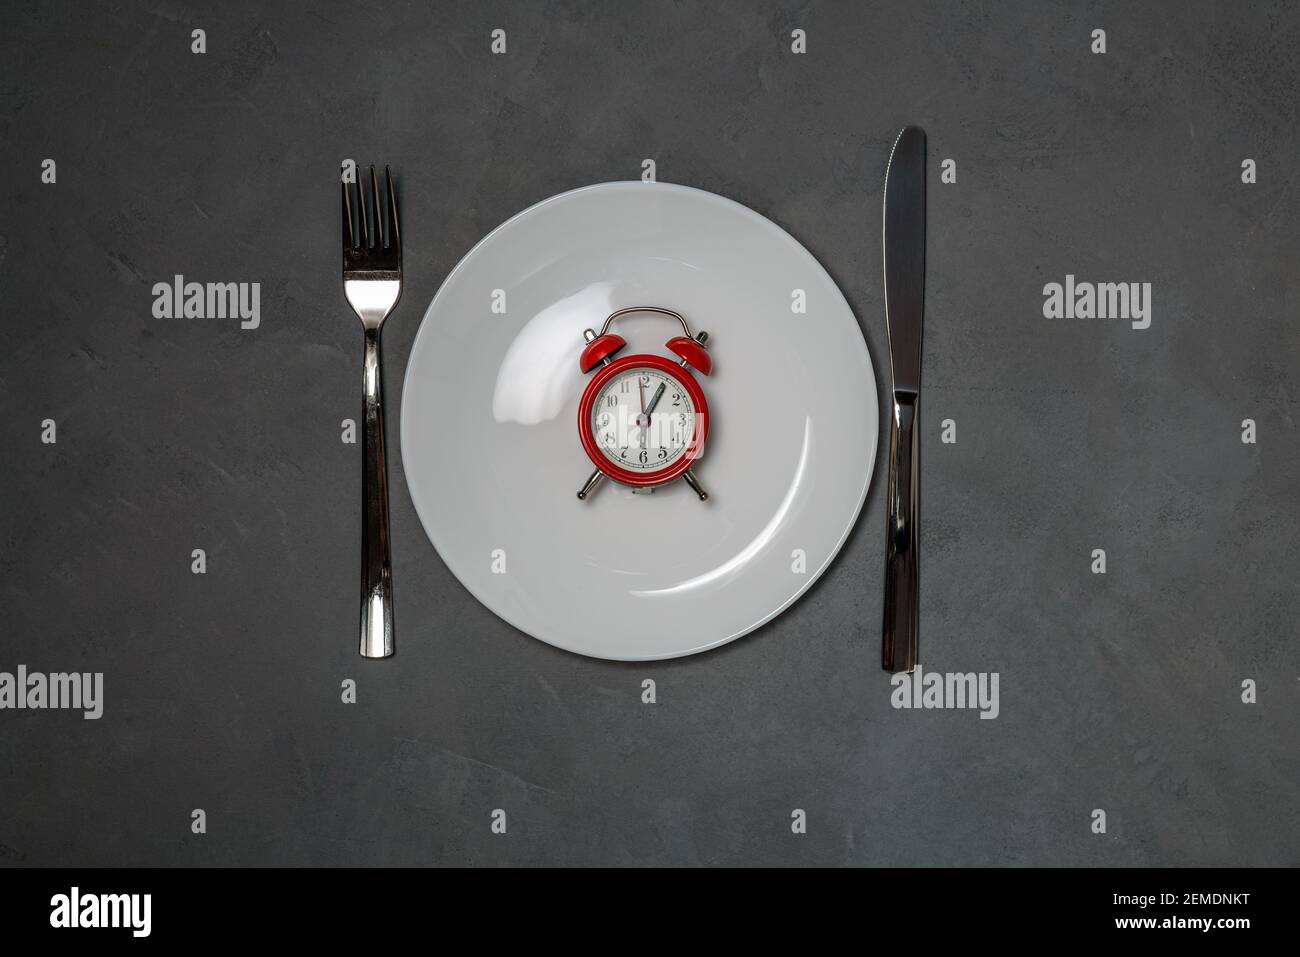 Plate with red alarm clock. intermittent fasting diet concept Stock Photo